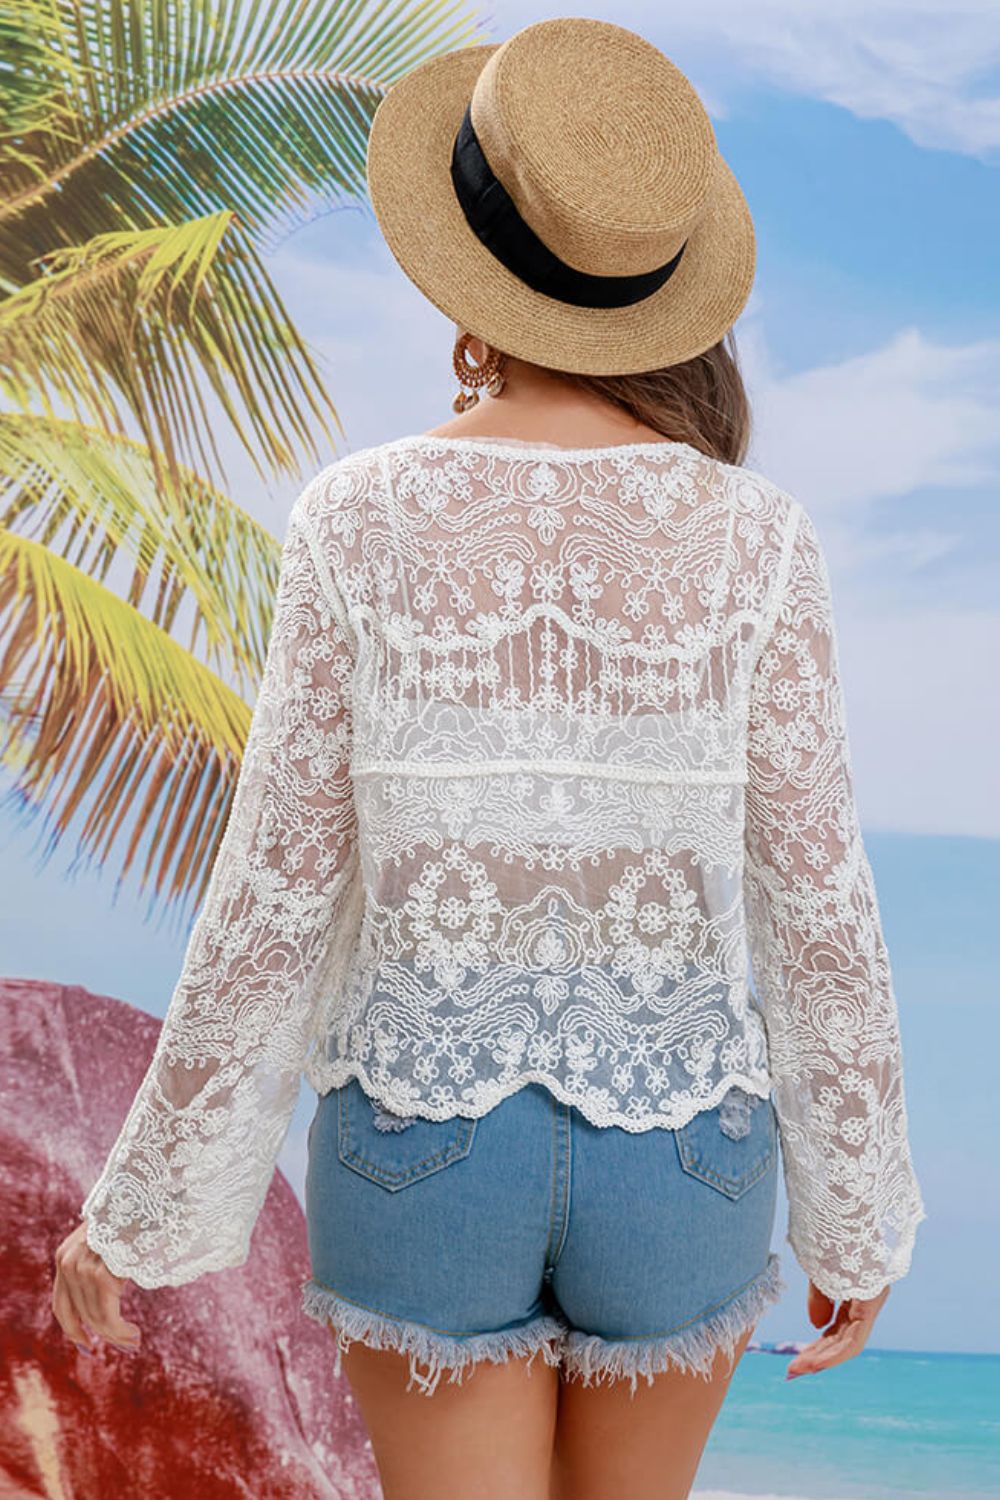 Buttoned Sheer Lace Cover Up - The Fashion Unicorn